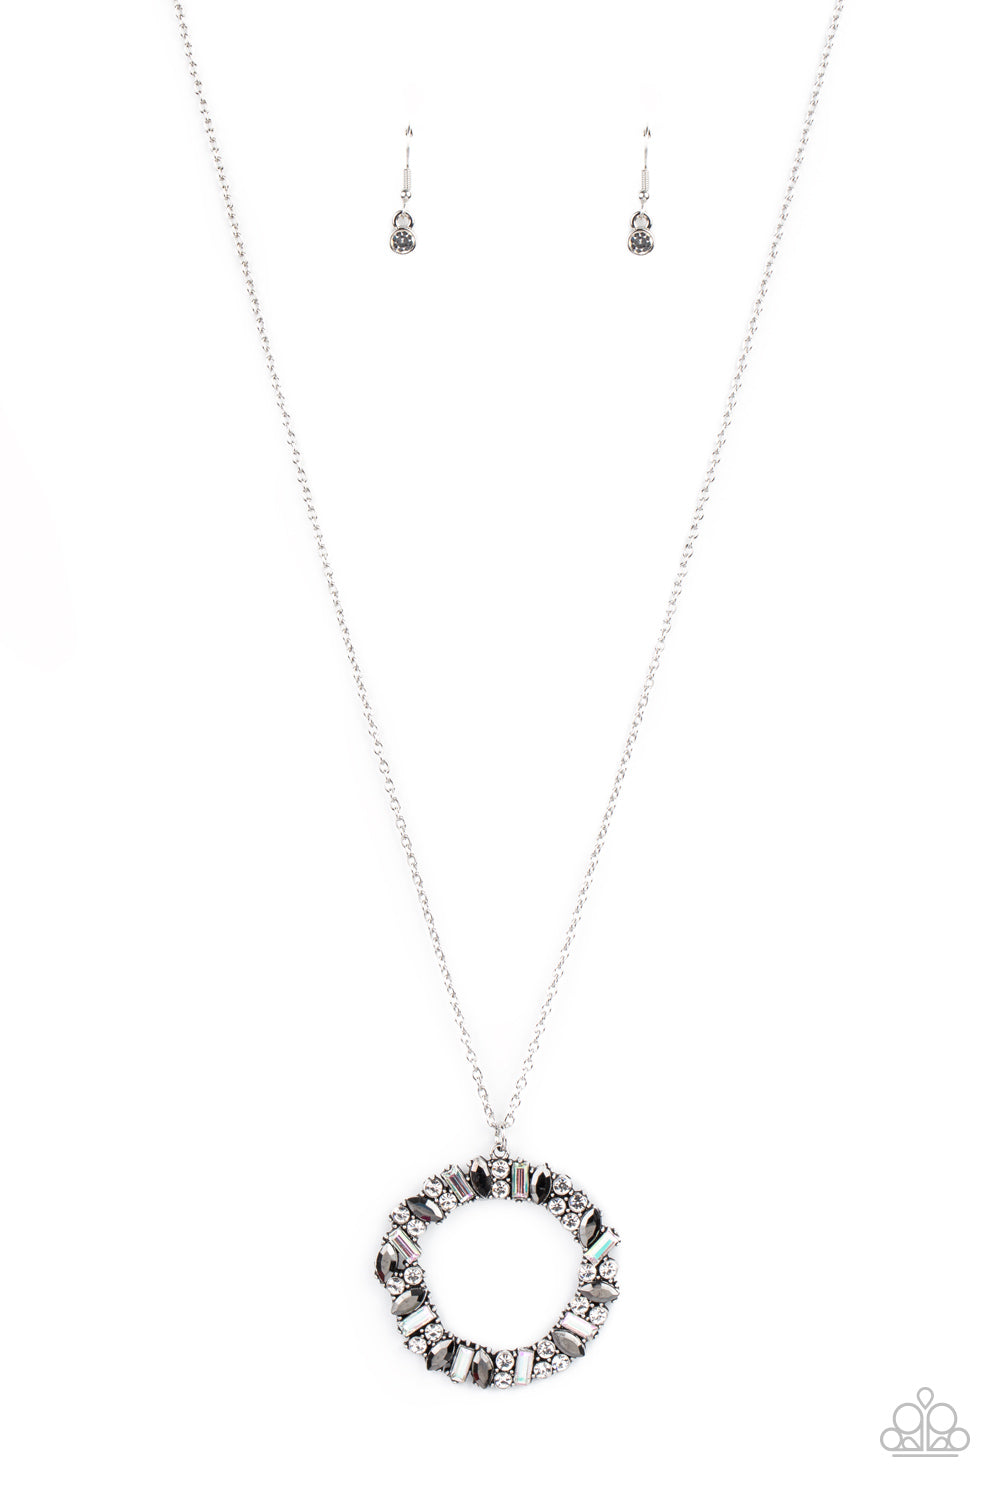 WREATHED IN WEALTH - SILVER NECKLACE